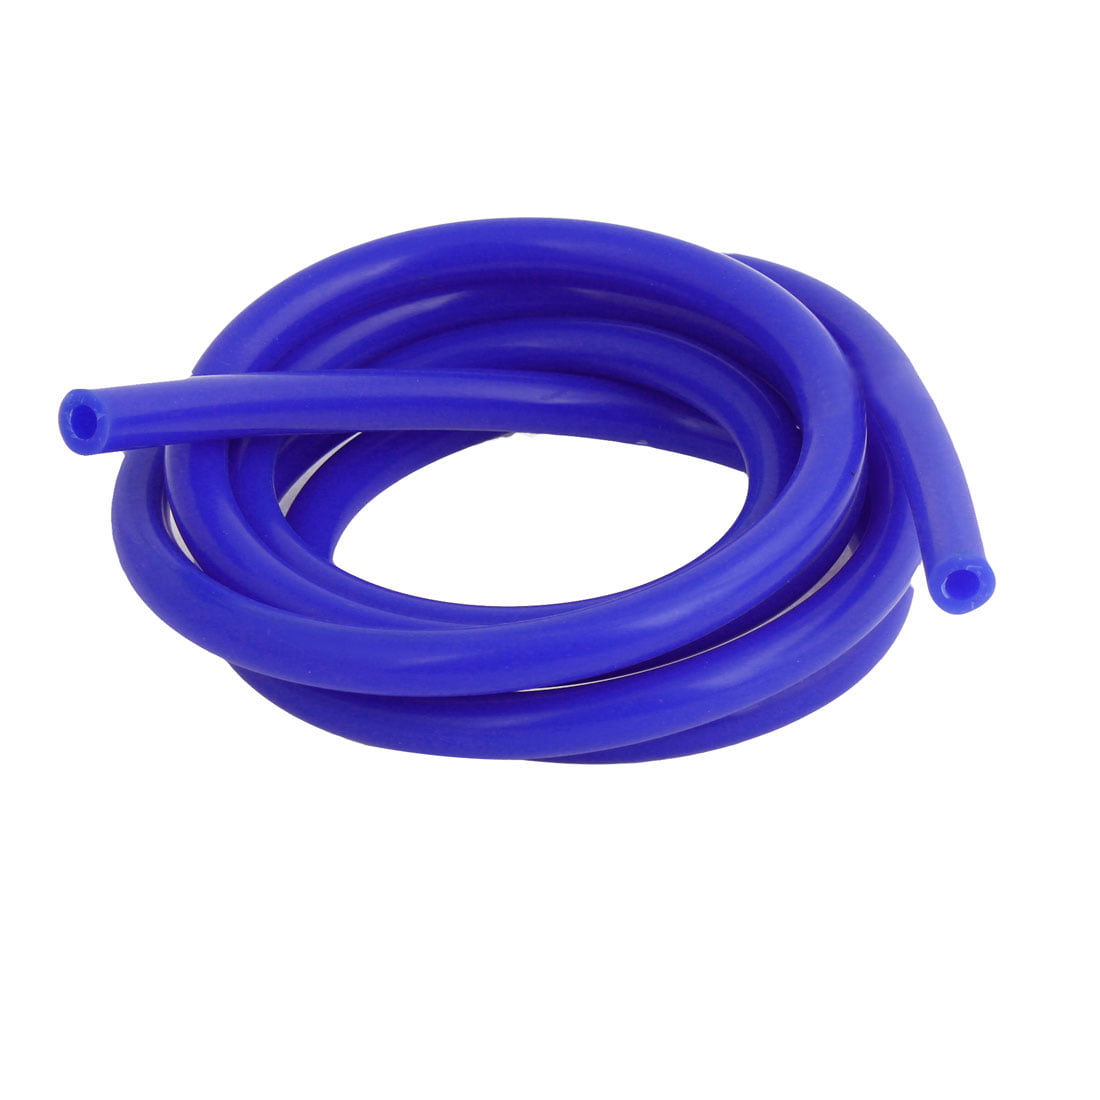 7mm x 11mm Silicone Translucent Tube Water Air Pump Hose Pipe 2 Meter 6.5Ft Long 